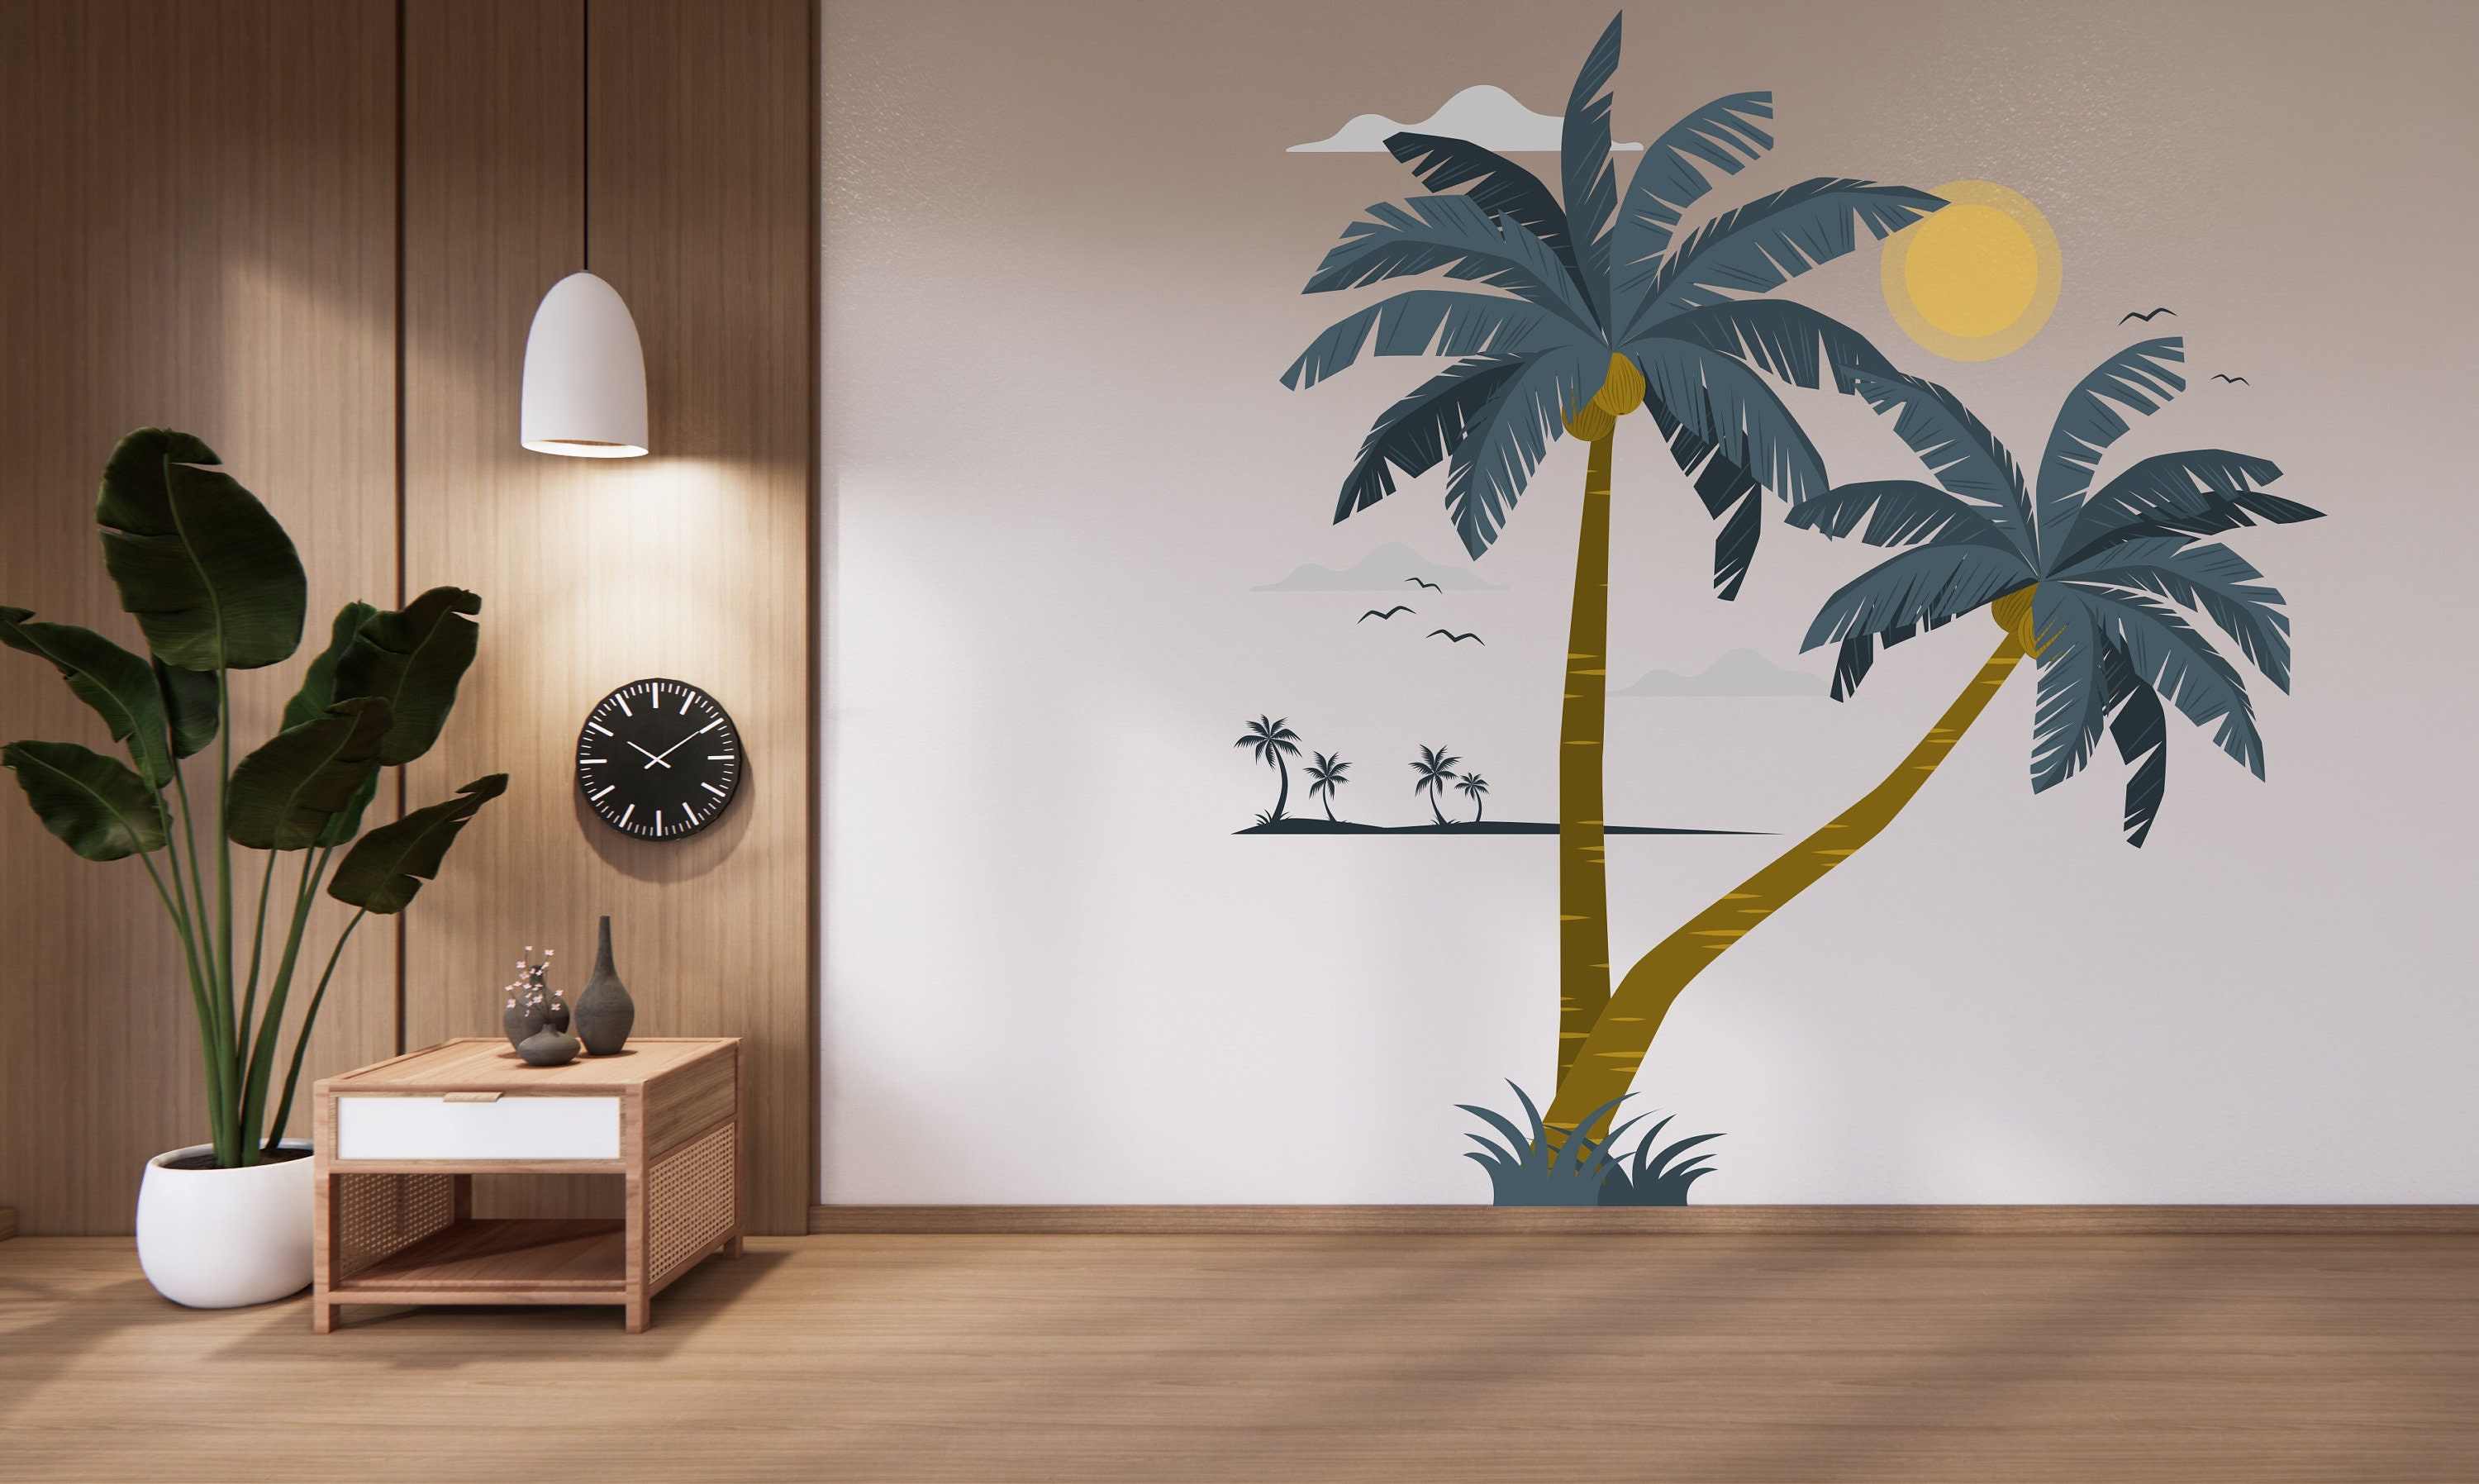 Palm Tree Tropical Holiday Home Vinyl Wall Decal Sticker Room Decor Crafts  FL16